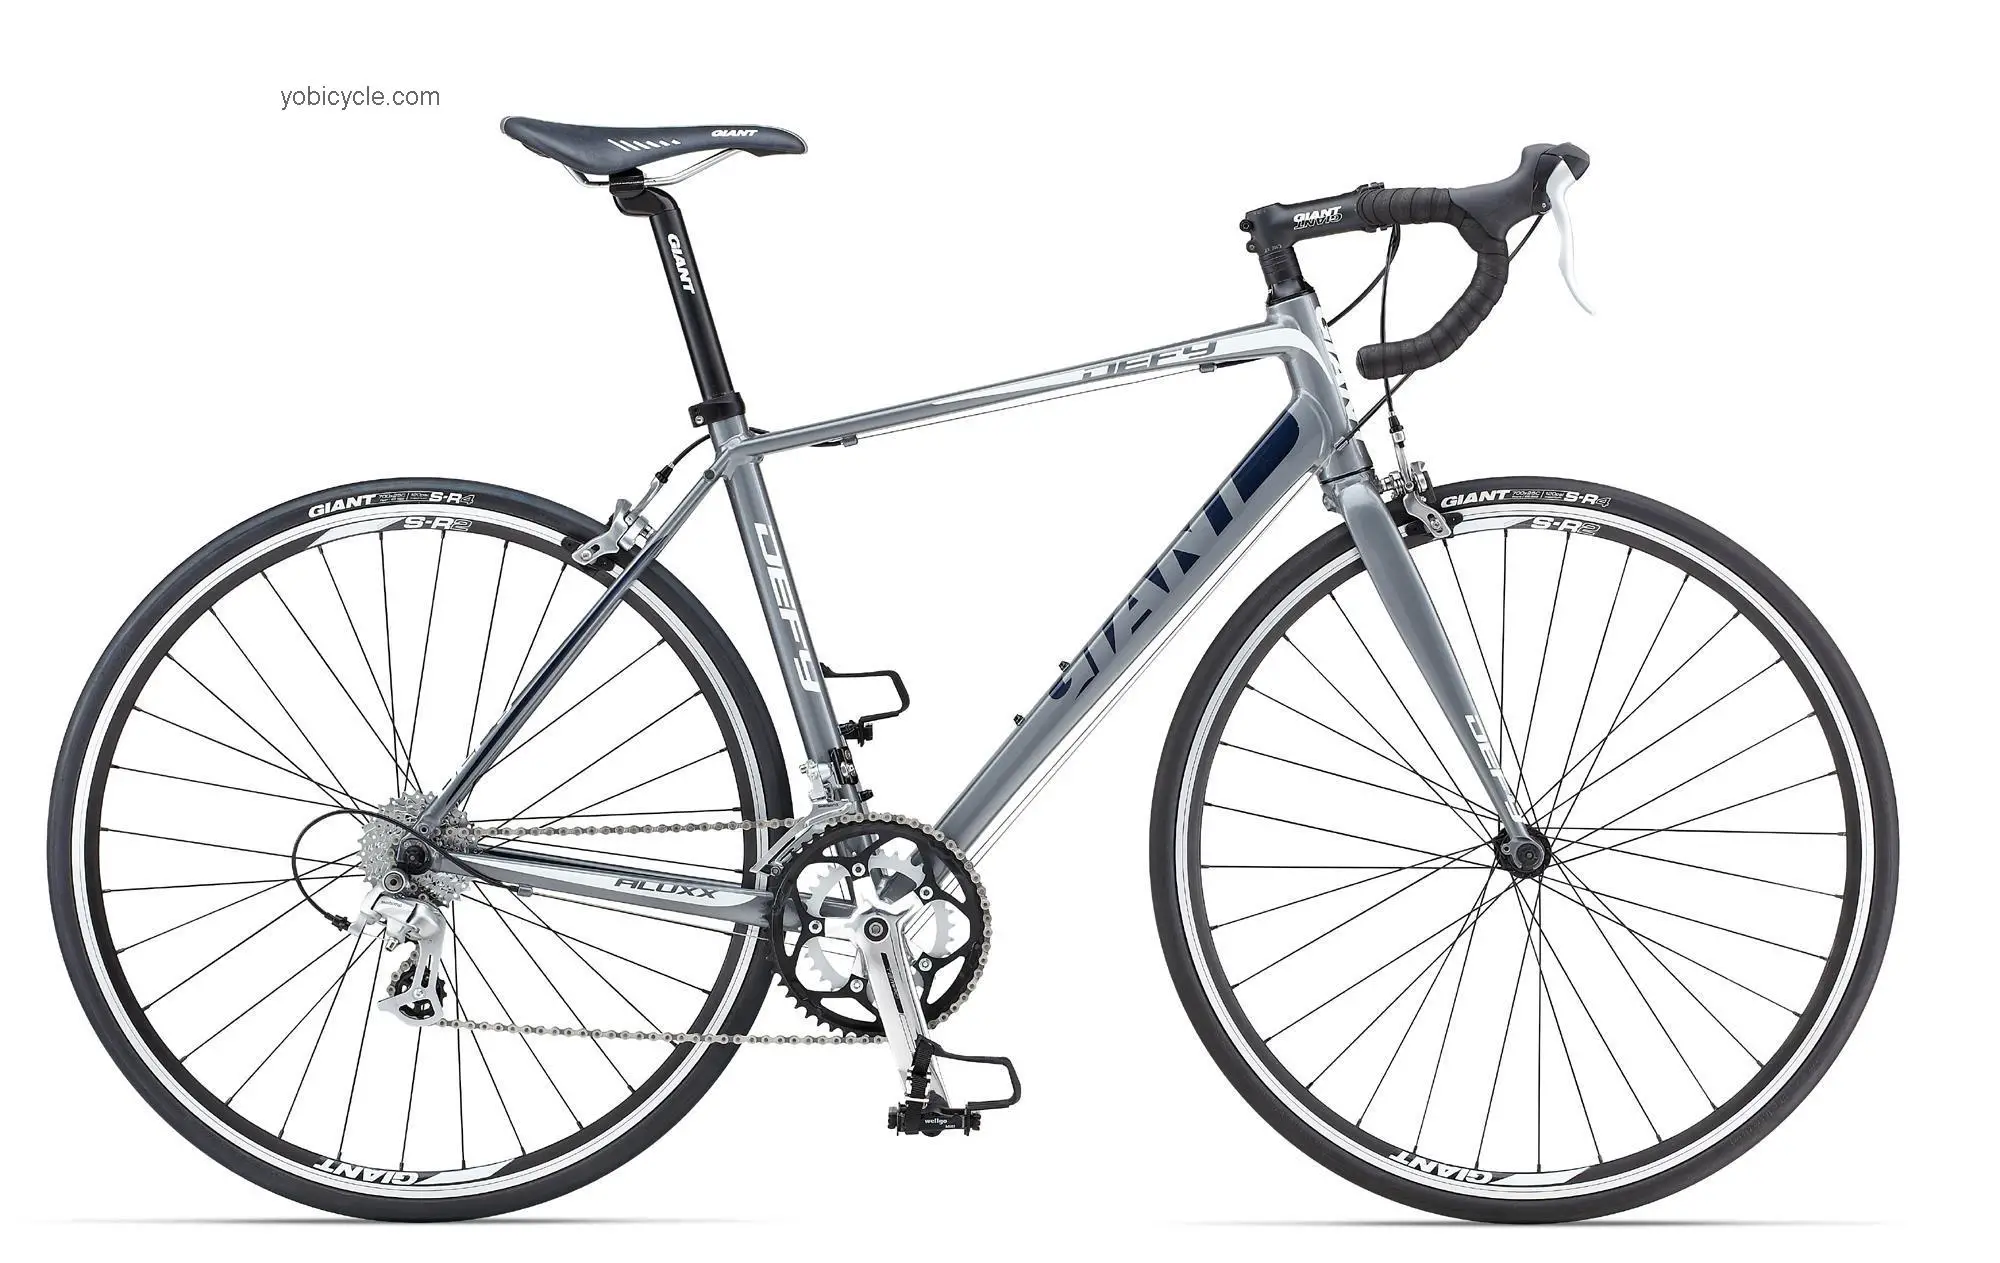 Giant Defy 5 competitors and comparison tool online specs and performance